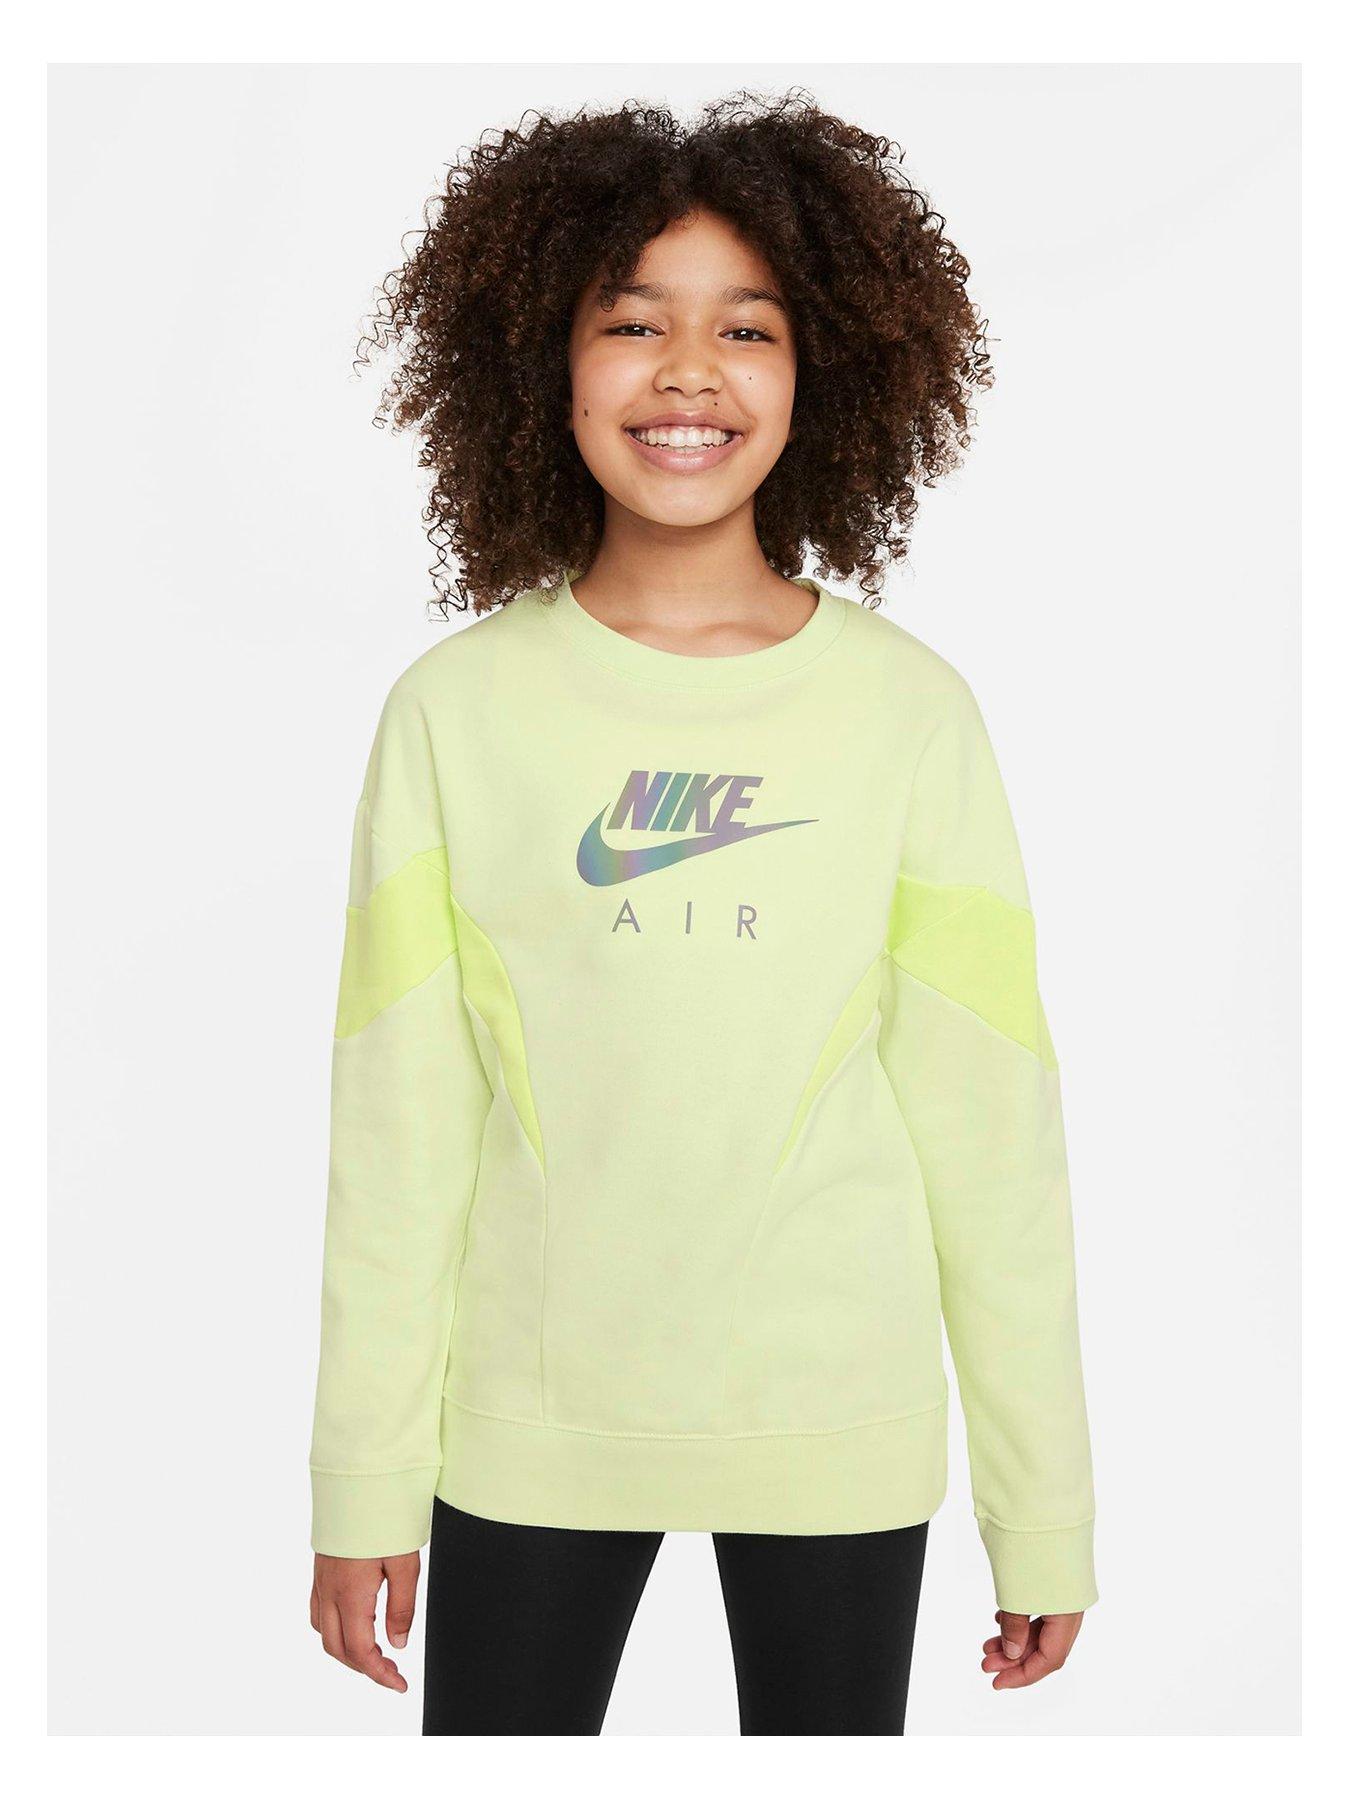 Kids NSW Girls Air French Terry Crew Sweat Top - Green